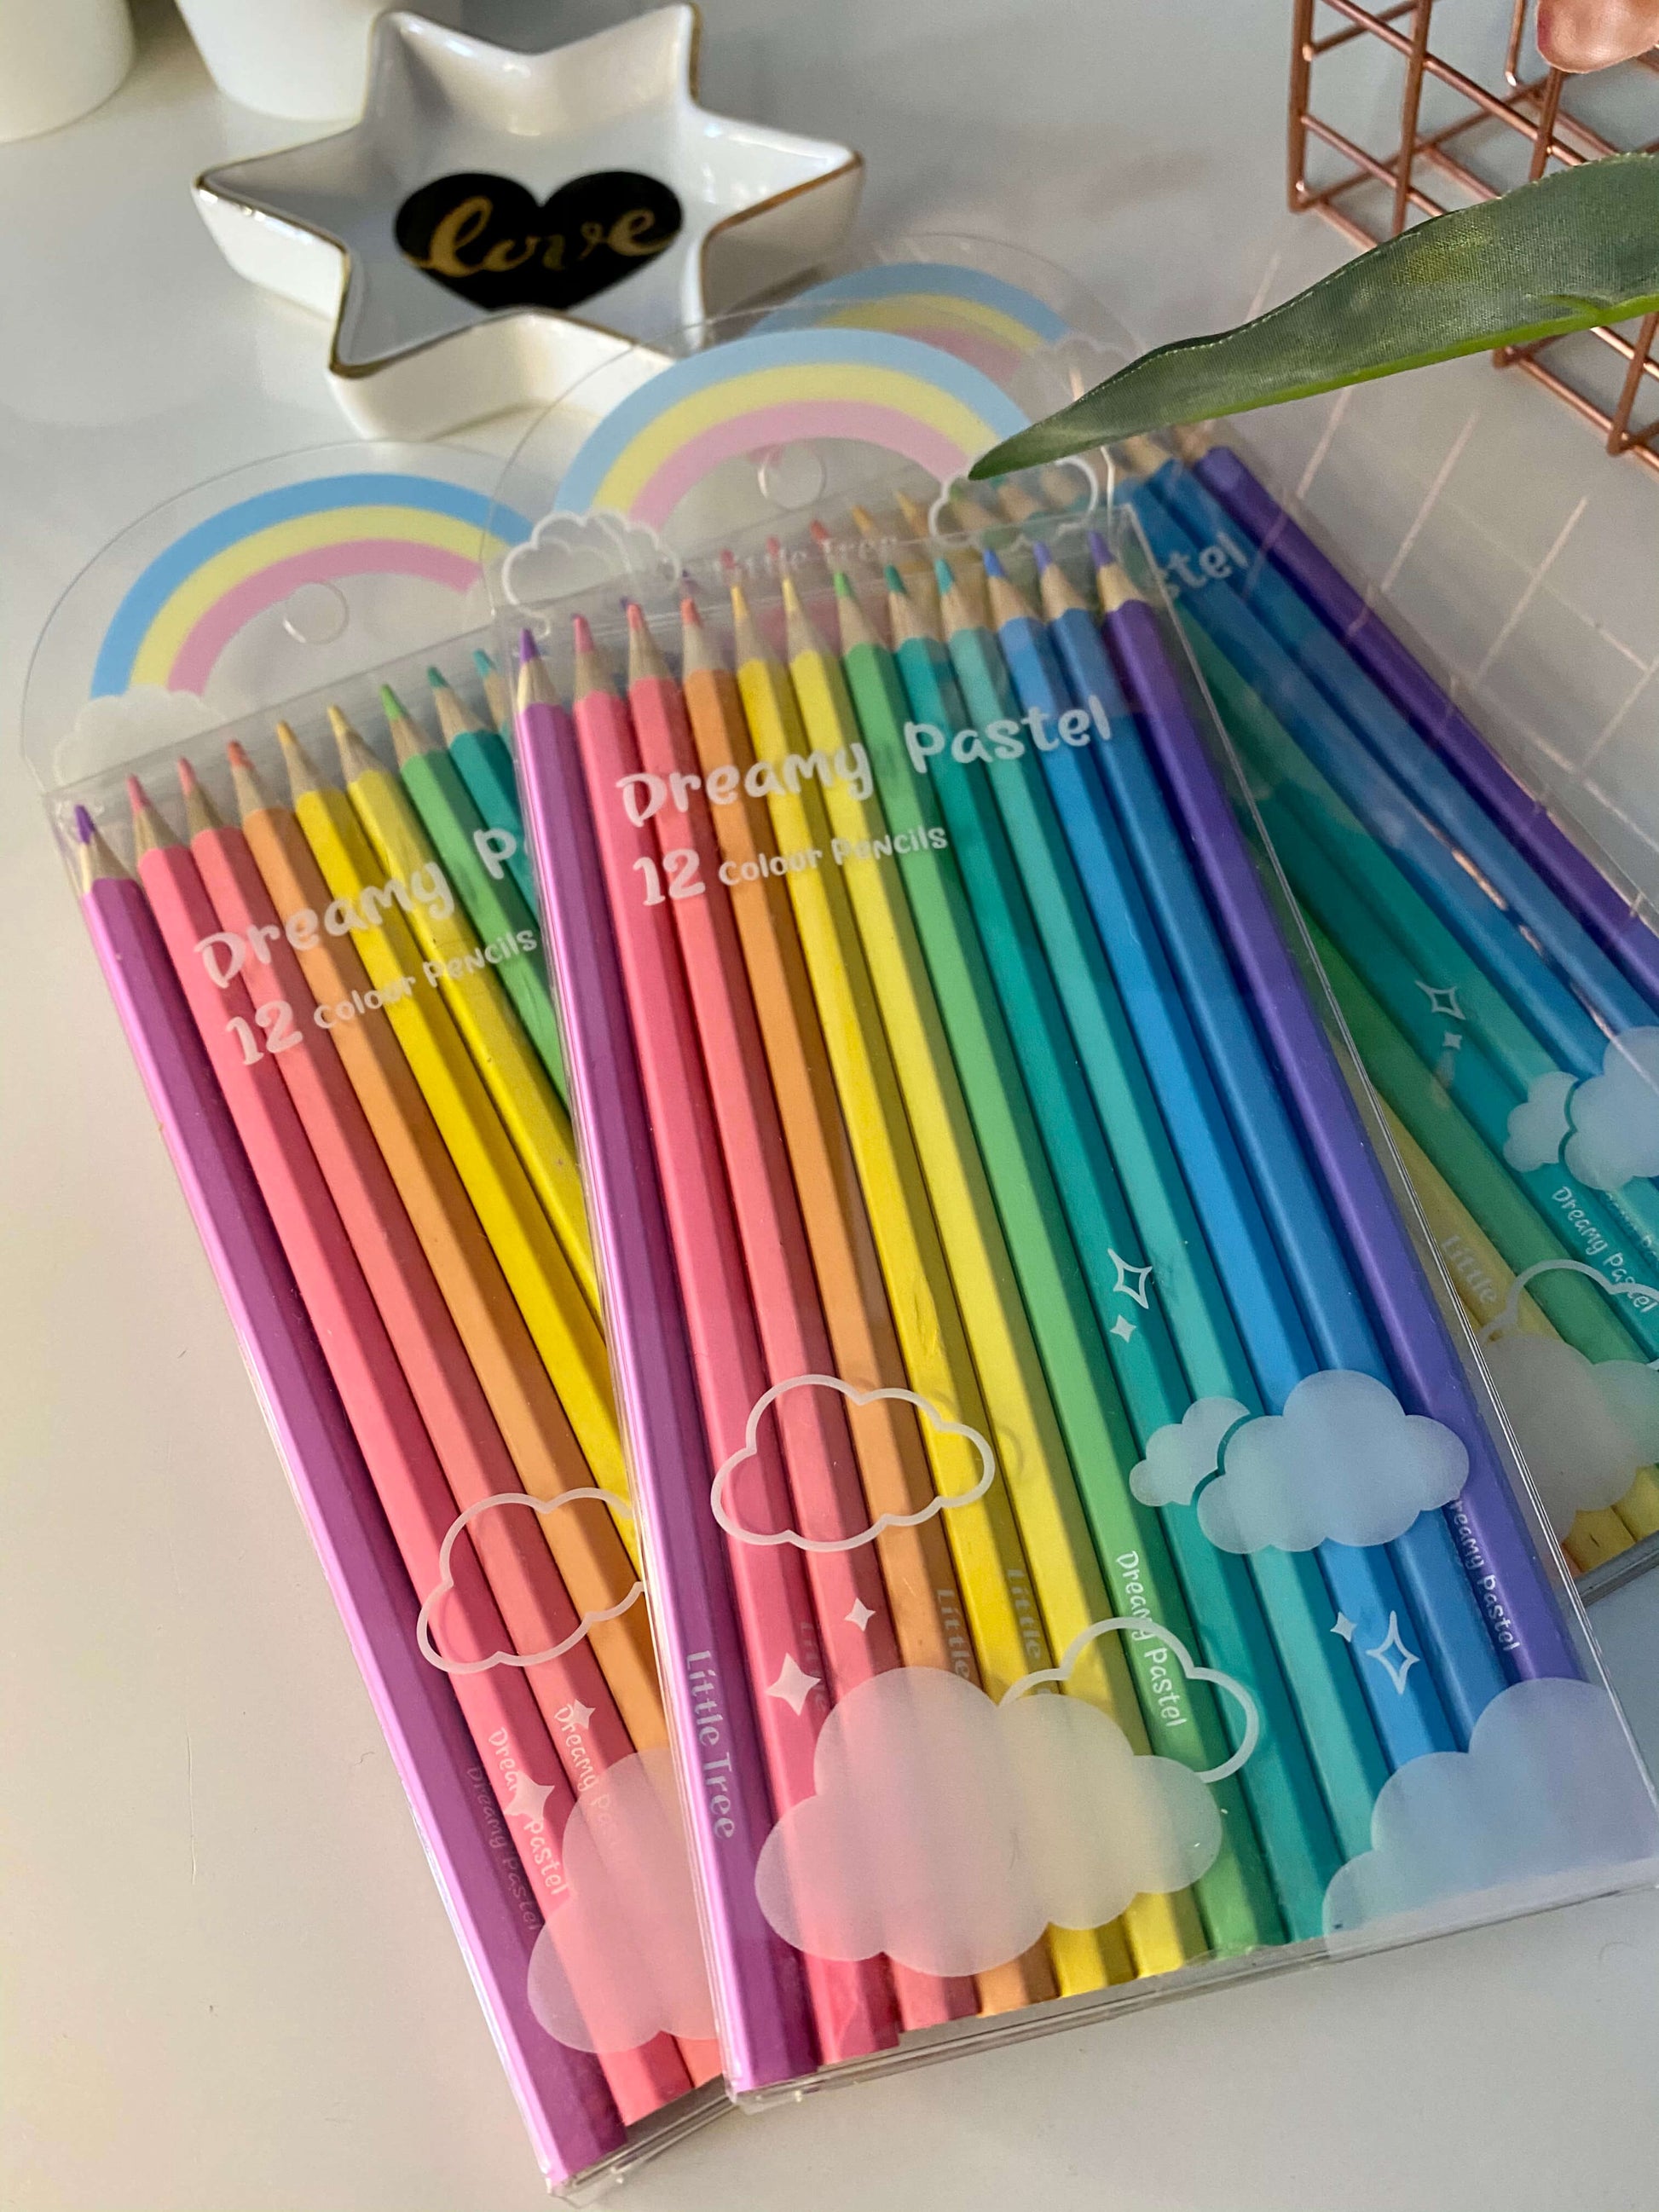 Dreamy pastel coloring pencil (Set of 12 color pencils) – The Gifts Quest